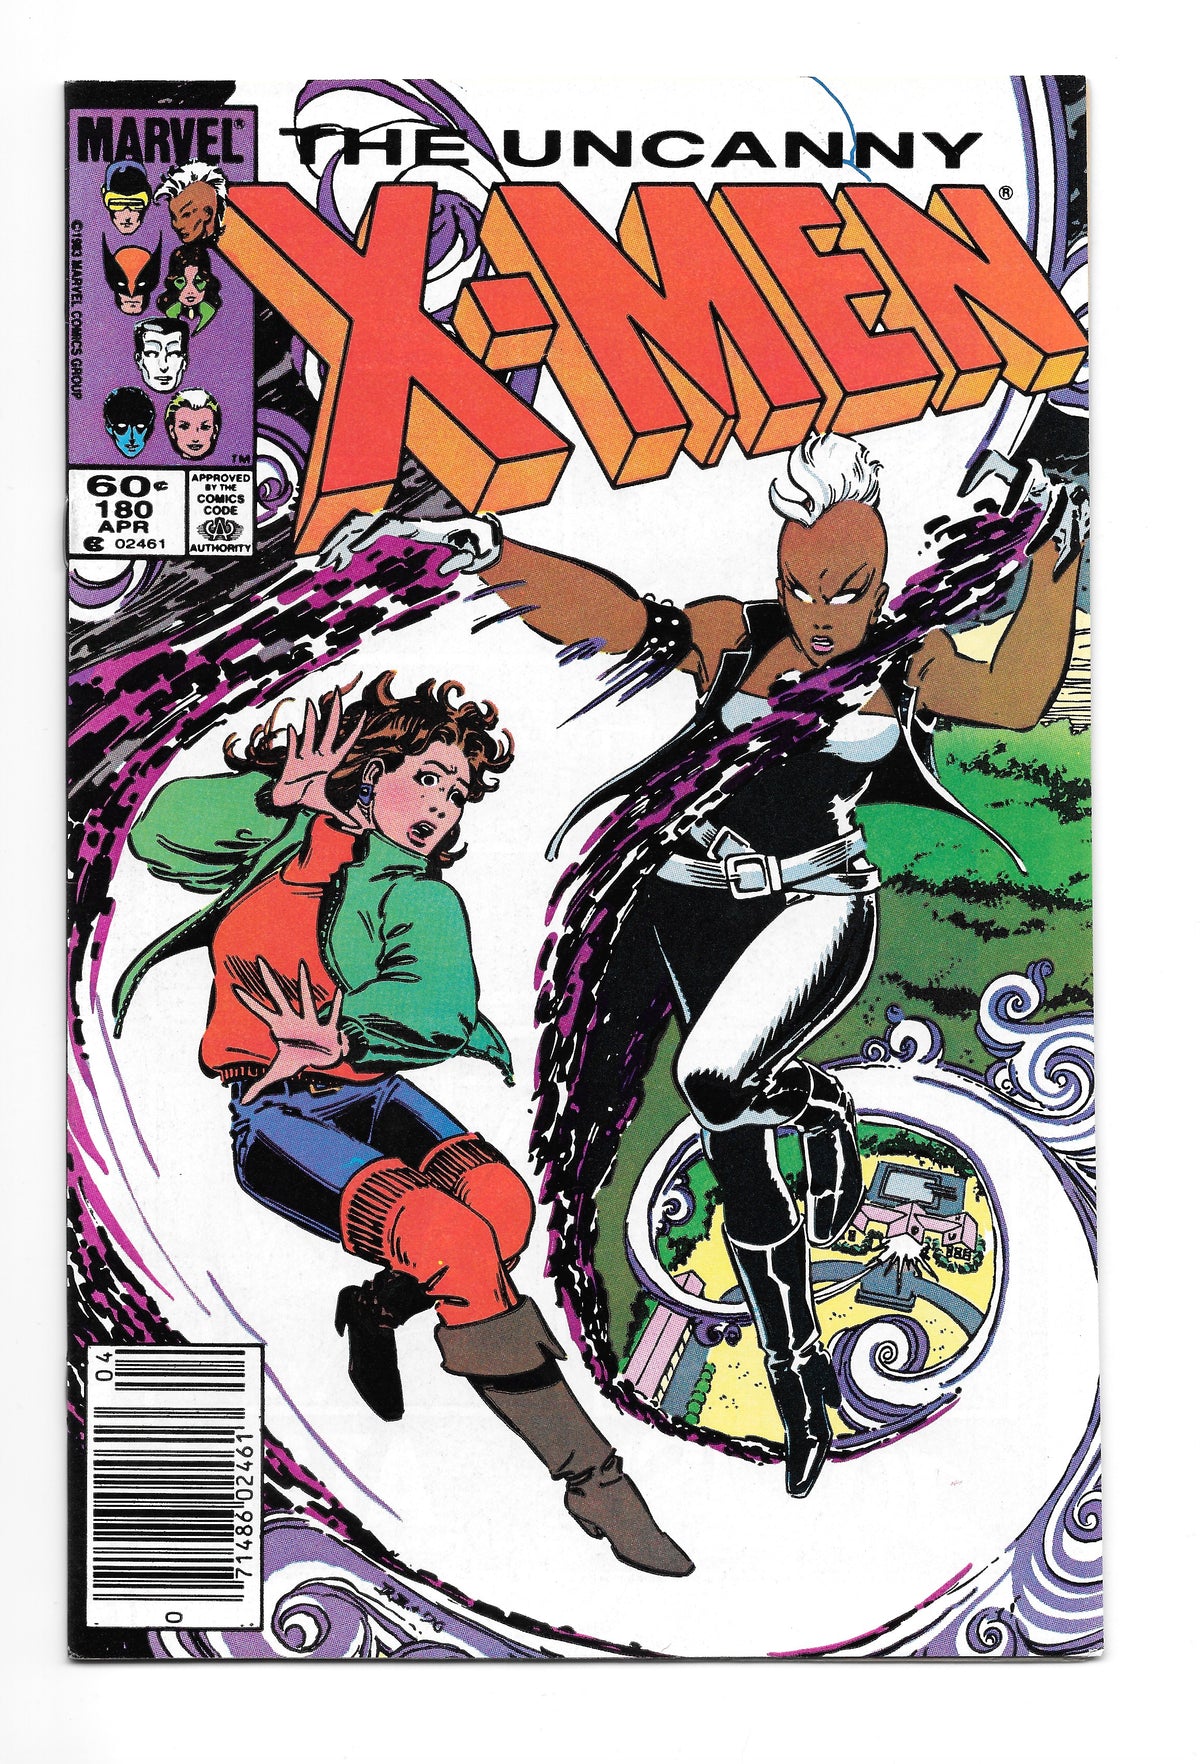 Photo of Uncanny X-Men, Vol. 1 (1984)  Iss 180B Very Fine/Near Mint  Comic sold by Stronghold Collectibles